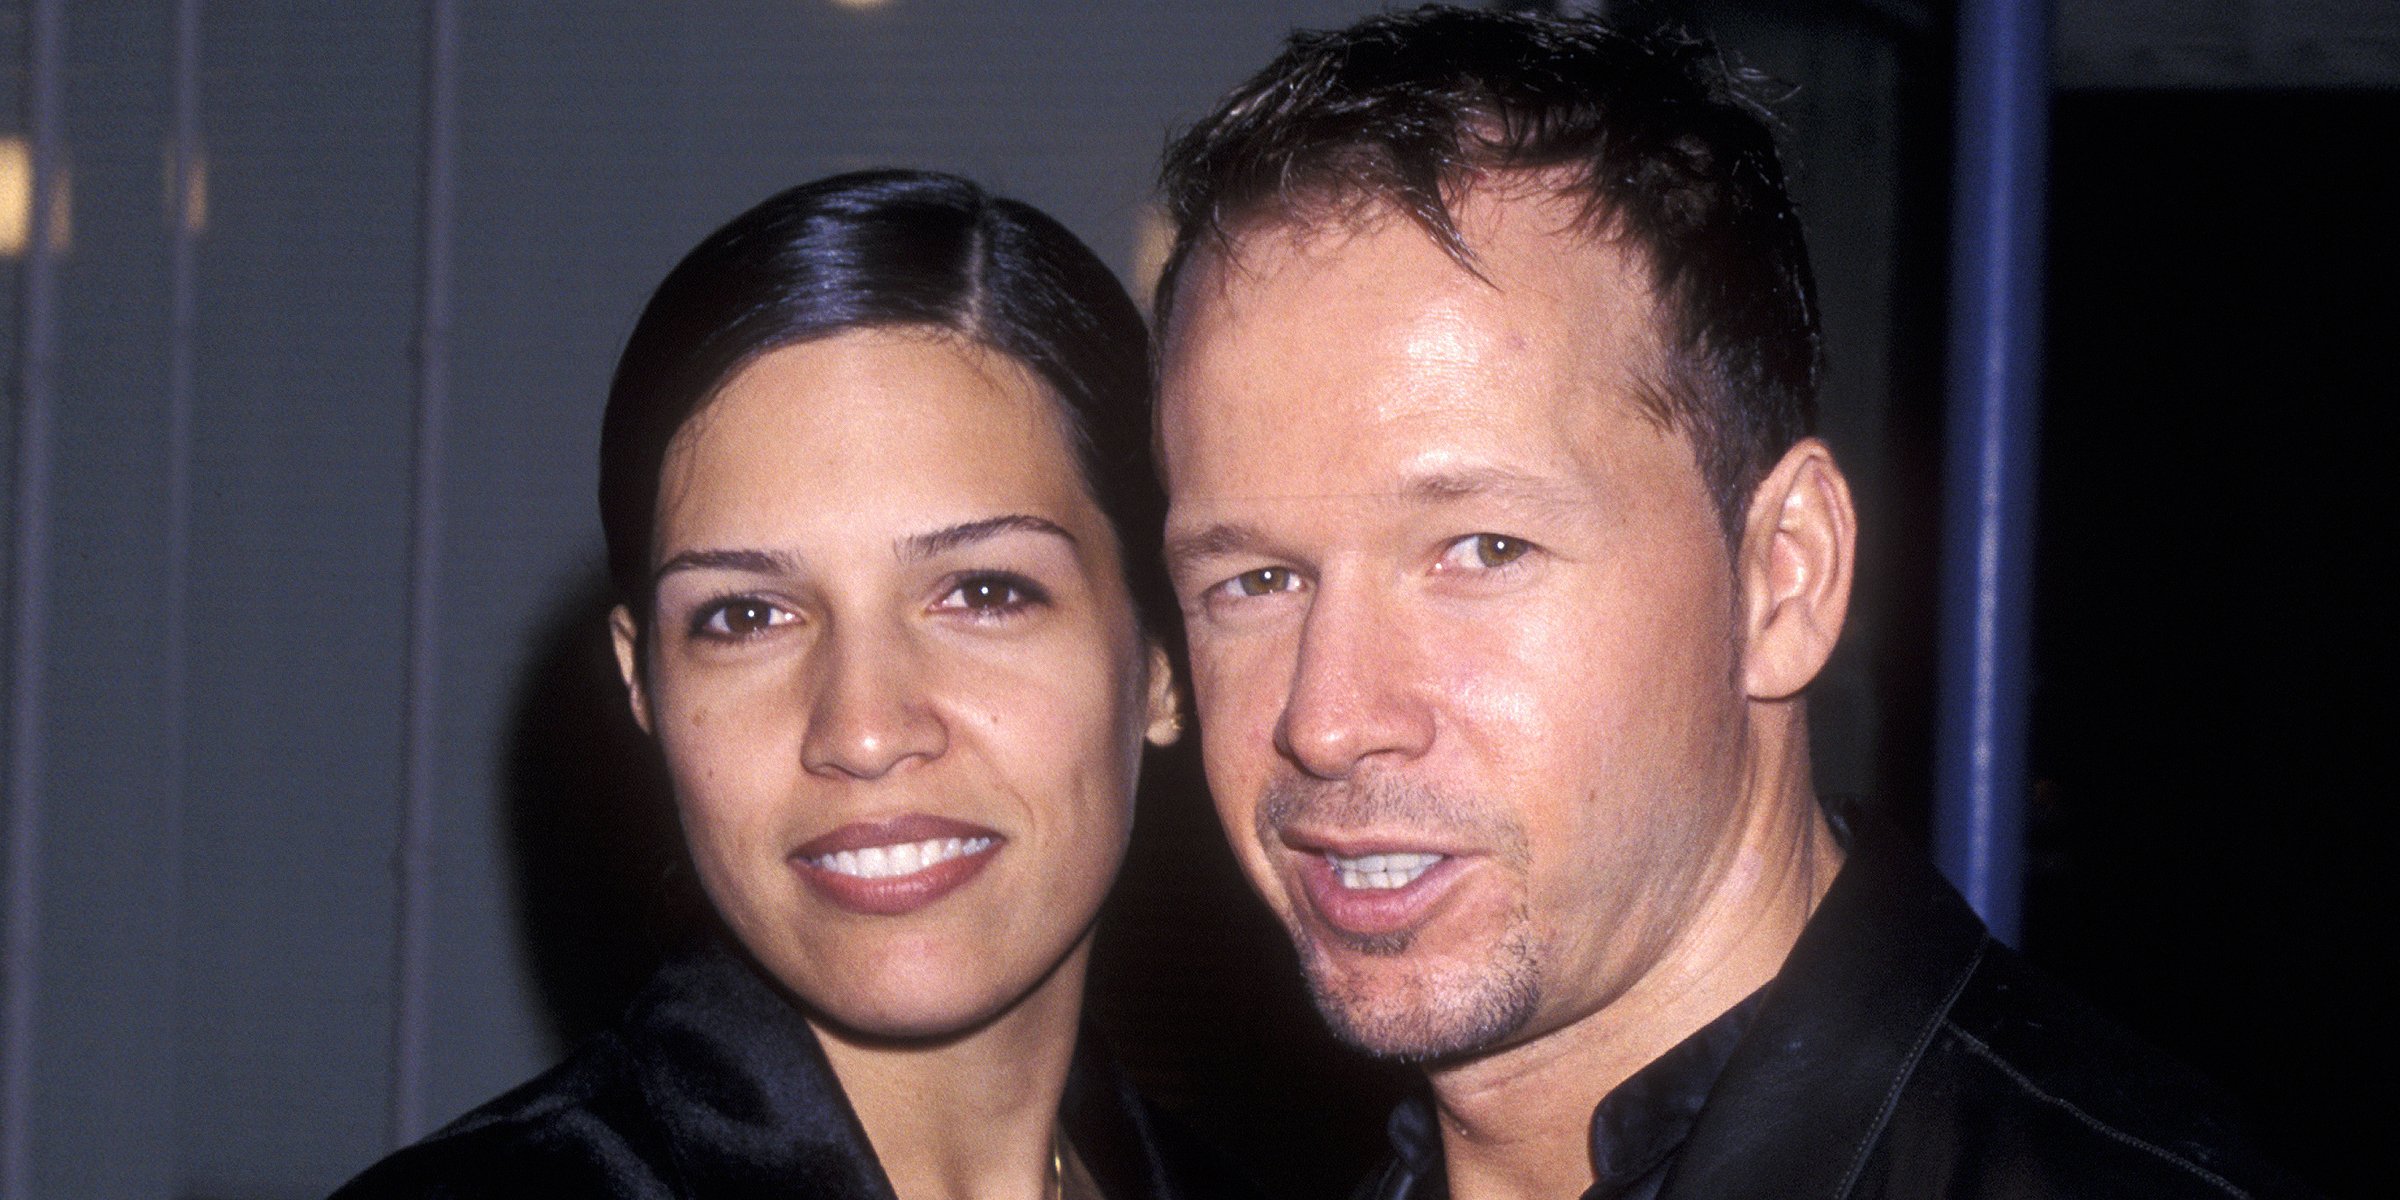 Kimberly Fey and Donnie Wahlberg | Source: Getty Images